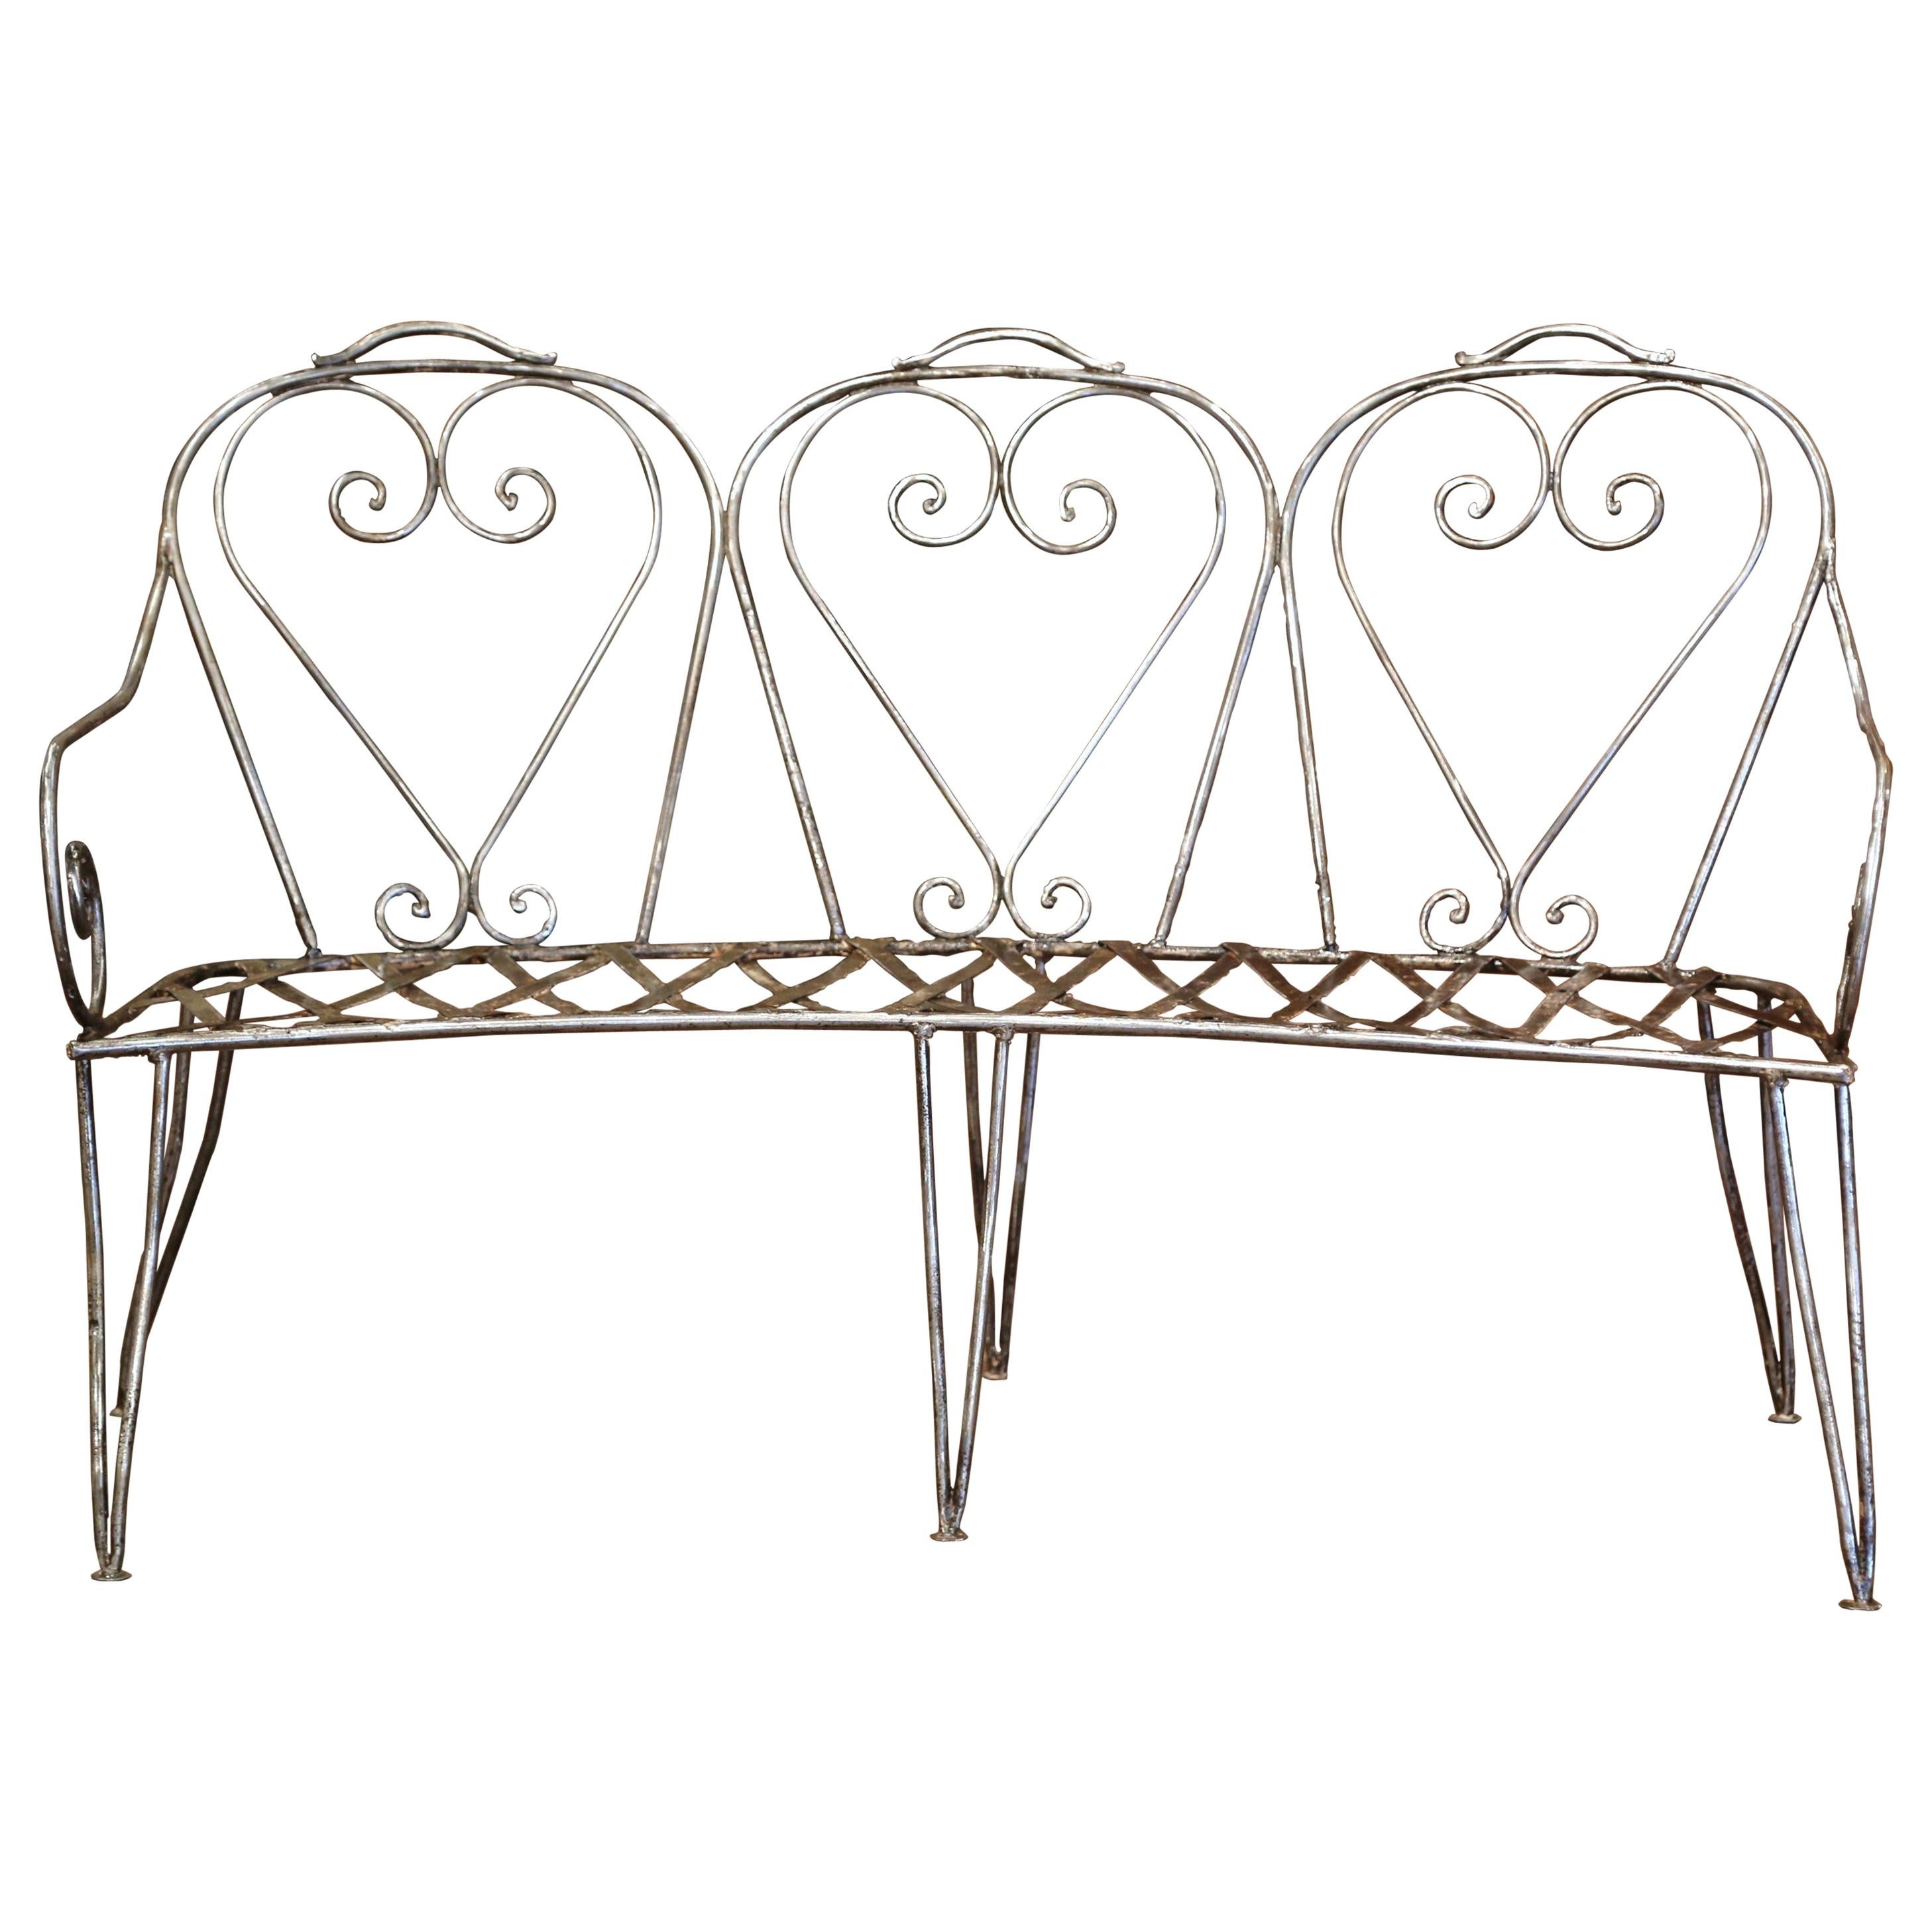 Add extra seating to an outdoor space, porch or patio with this elegant antique iron bench. Crafted in northern France circa 1860, the rounded bench sits on six tapered and angled legs and could accommodate three people. The delicate garden bench